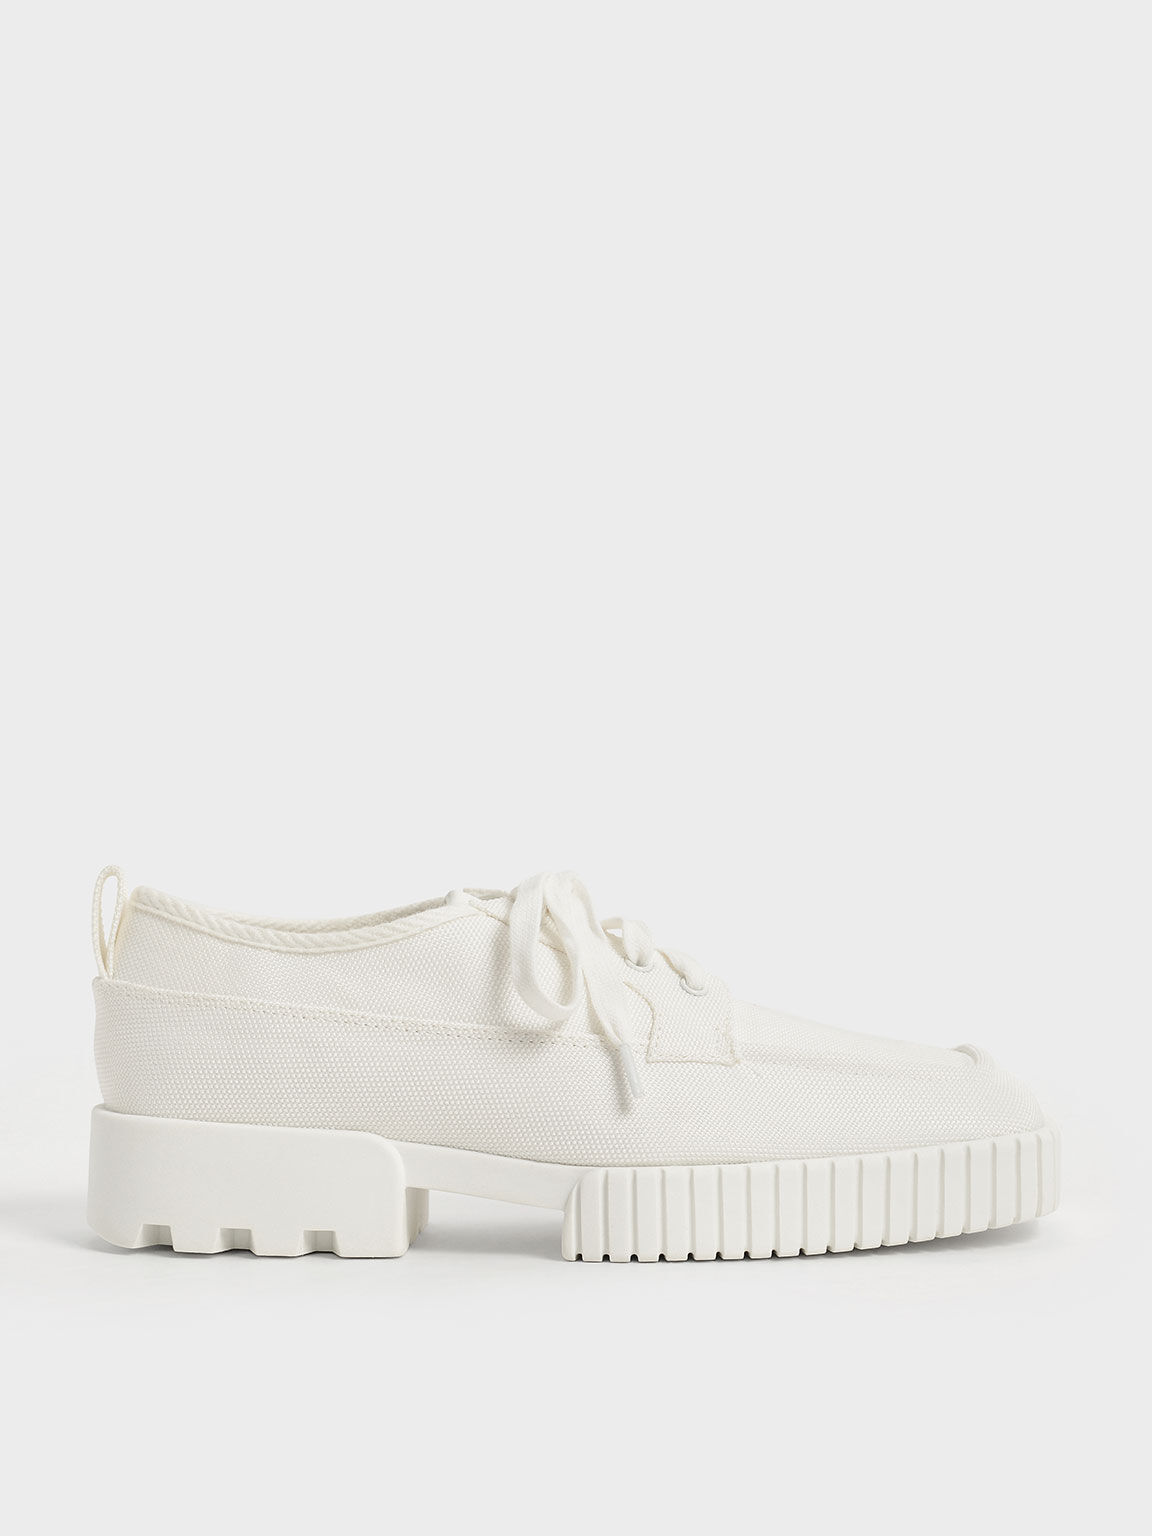 Recycled Polyester Low-Top Sneakers, Cream, hi-res